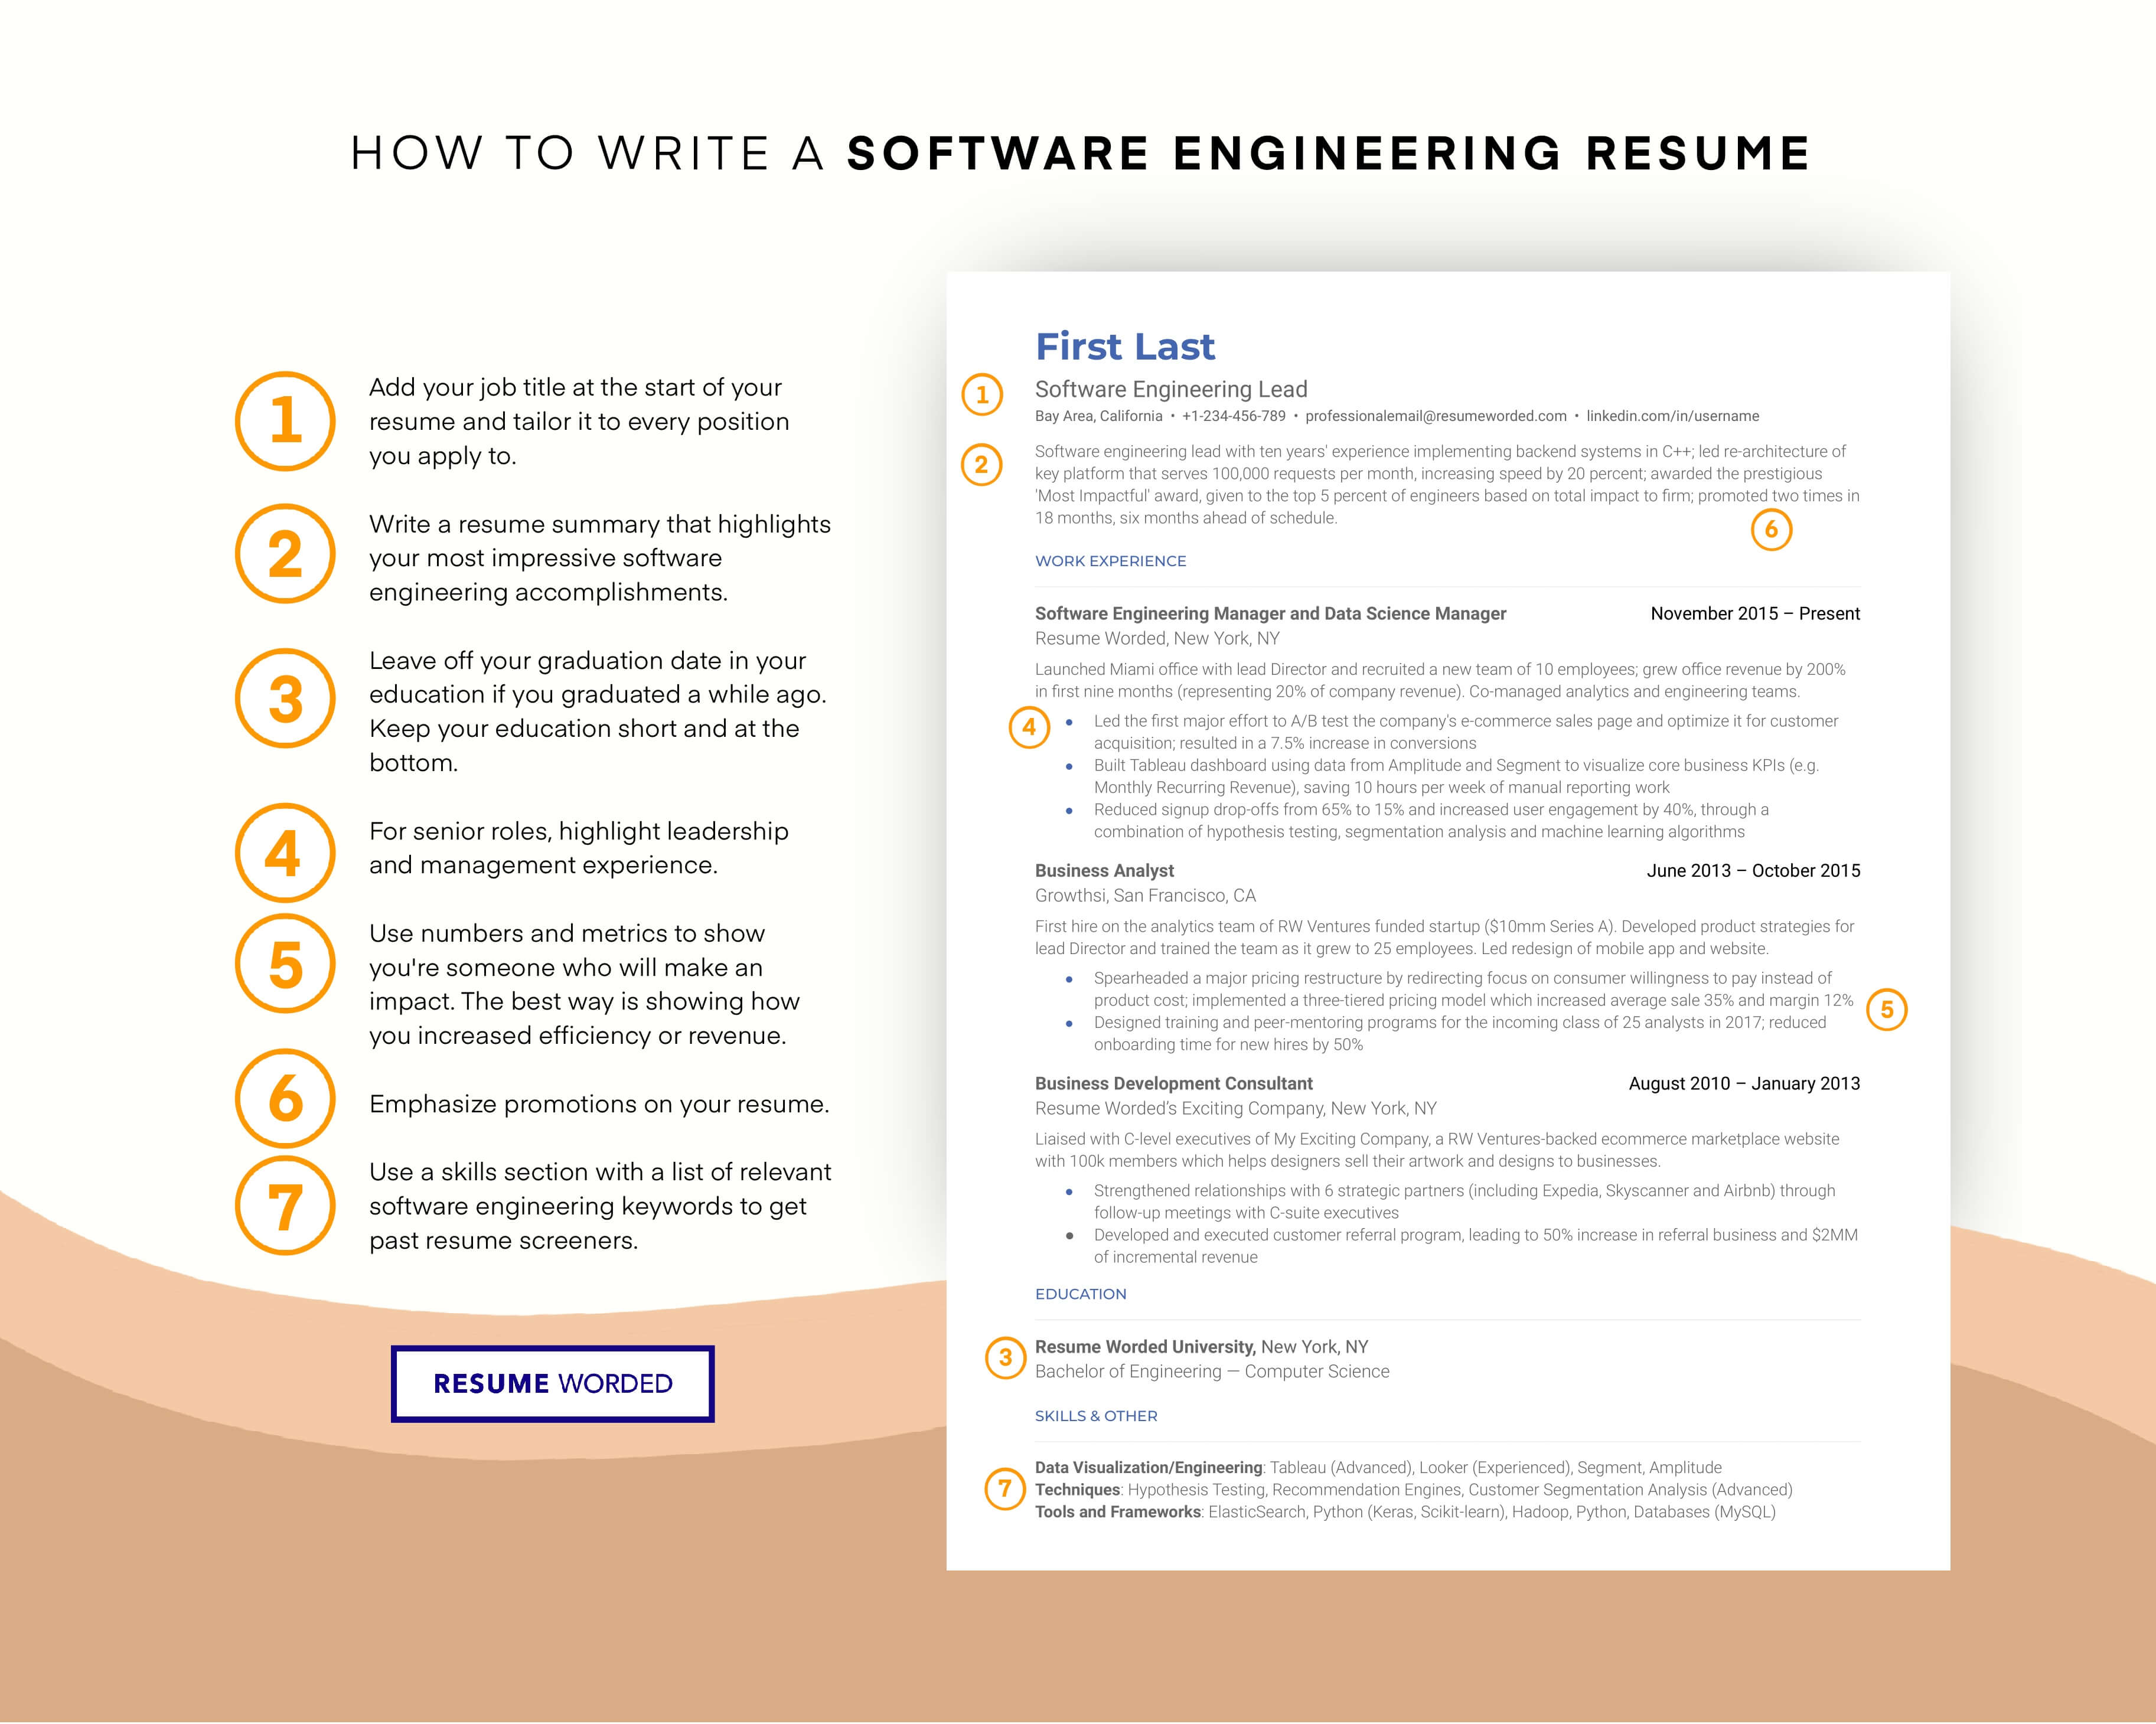 Show your technical skills with specific software - Junior Graphic Designer CV